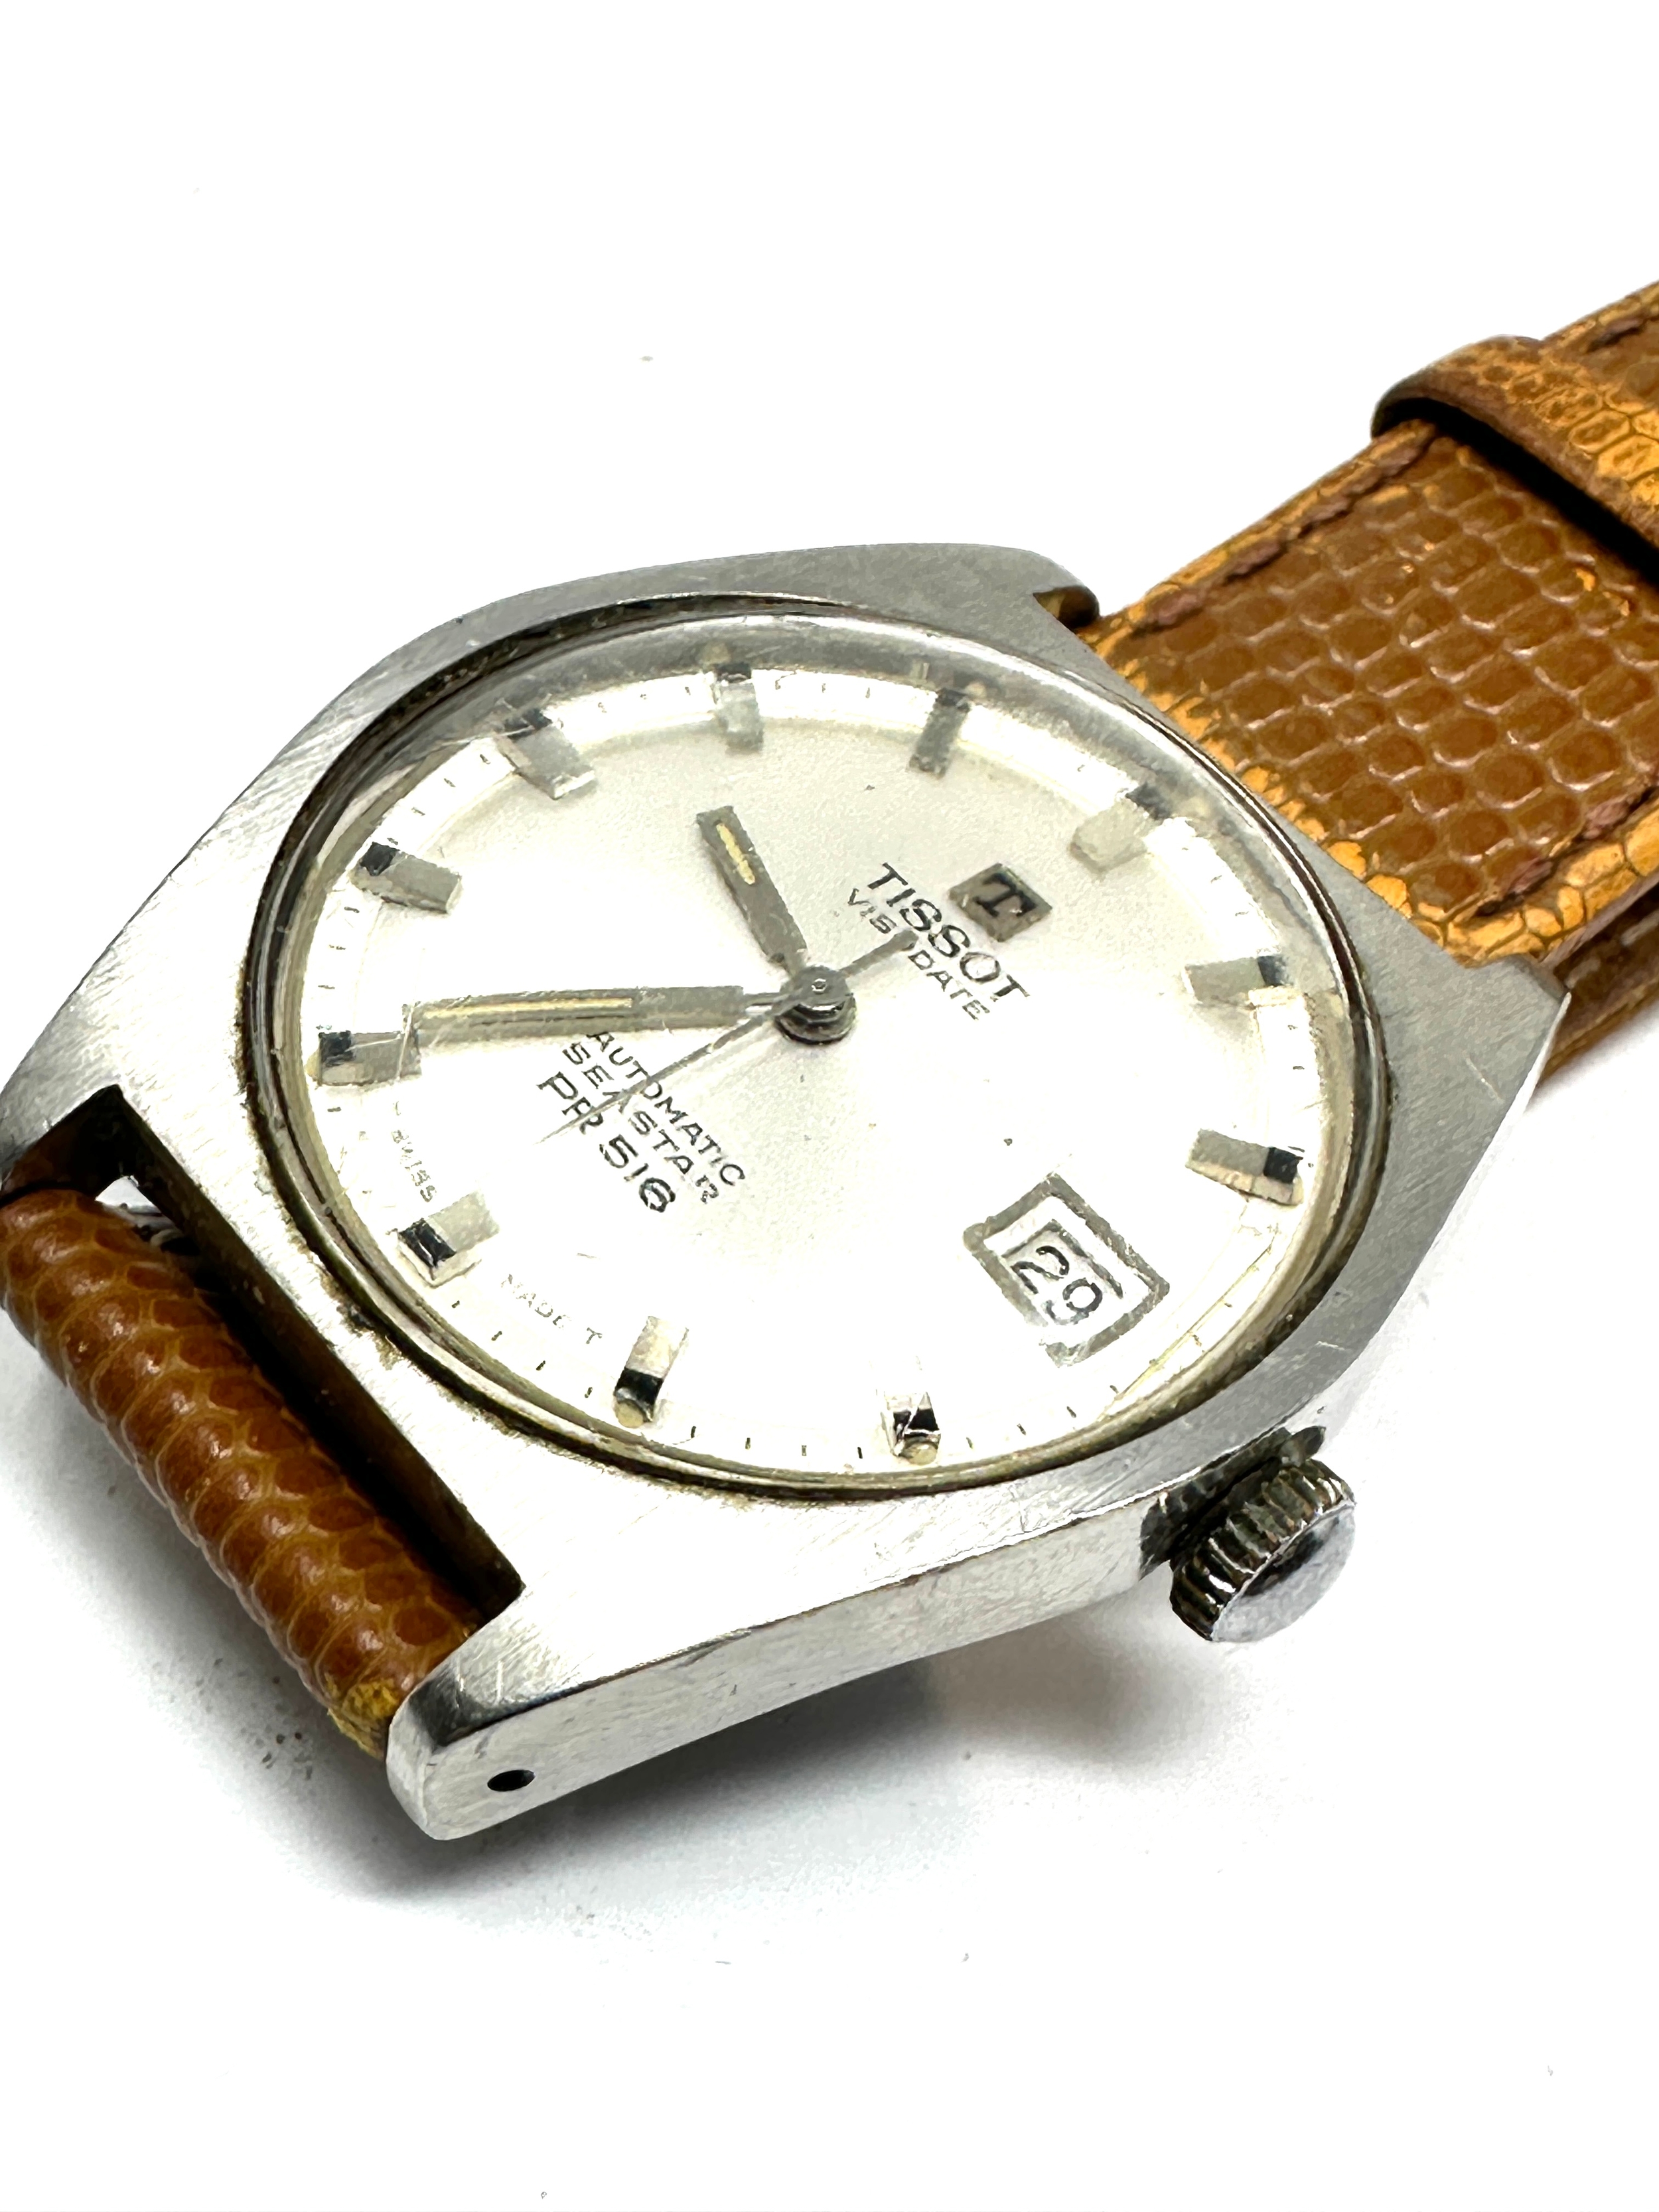 Vintage tissot visodate automatic seastar pr156 gents wristwatch the watch is ticking - Image 2 of 4